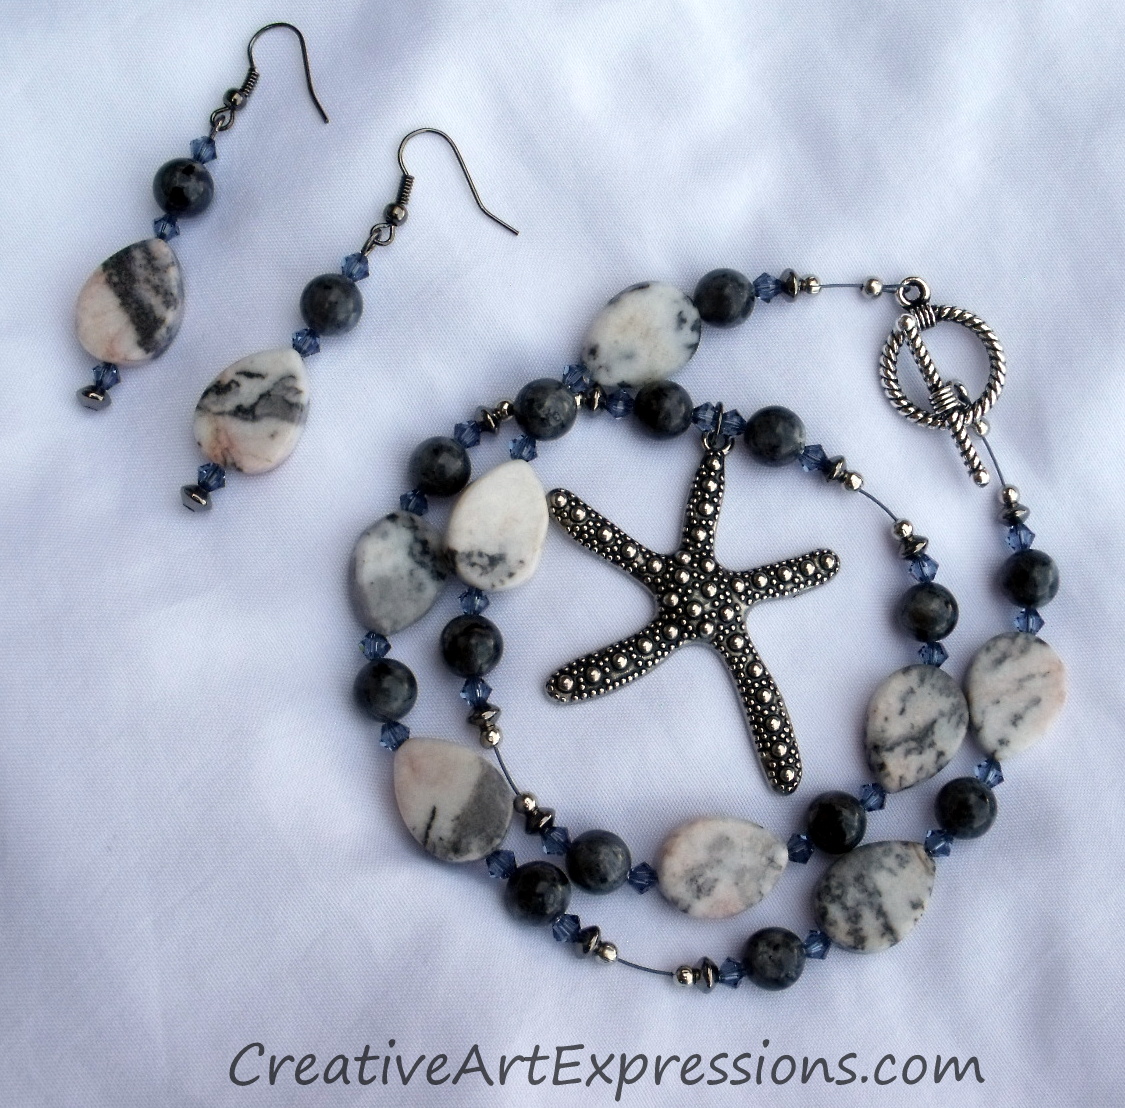 Creative Art Expressions Handmade Starfish Necklace & Earring Set